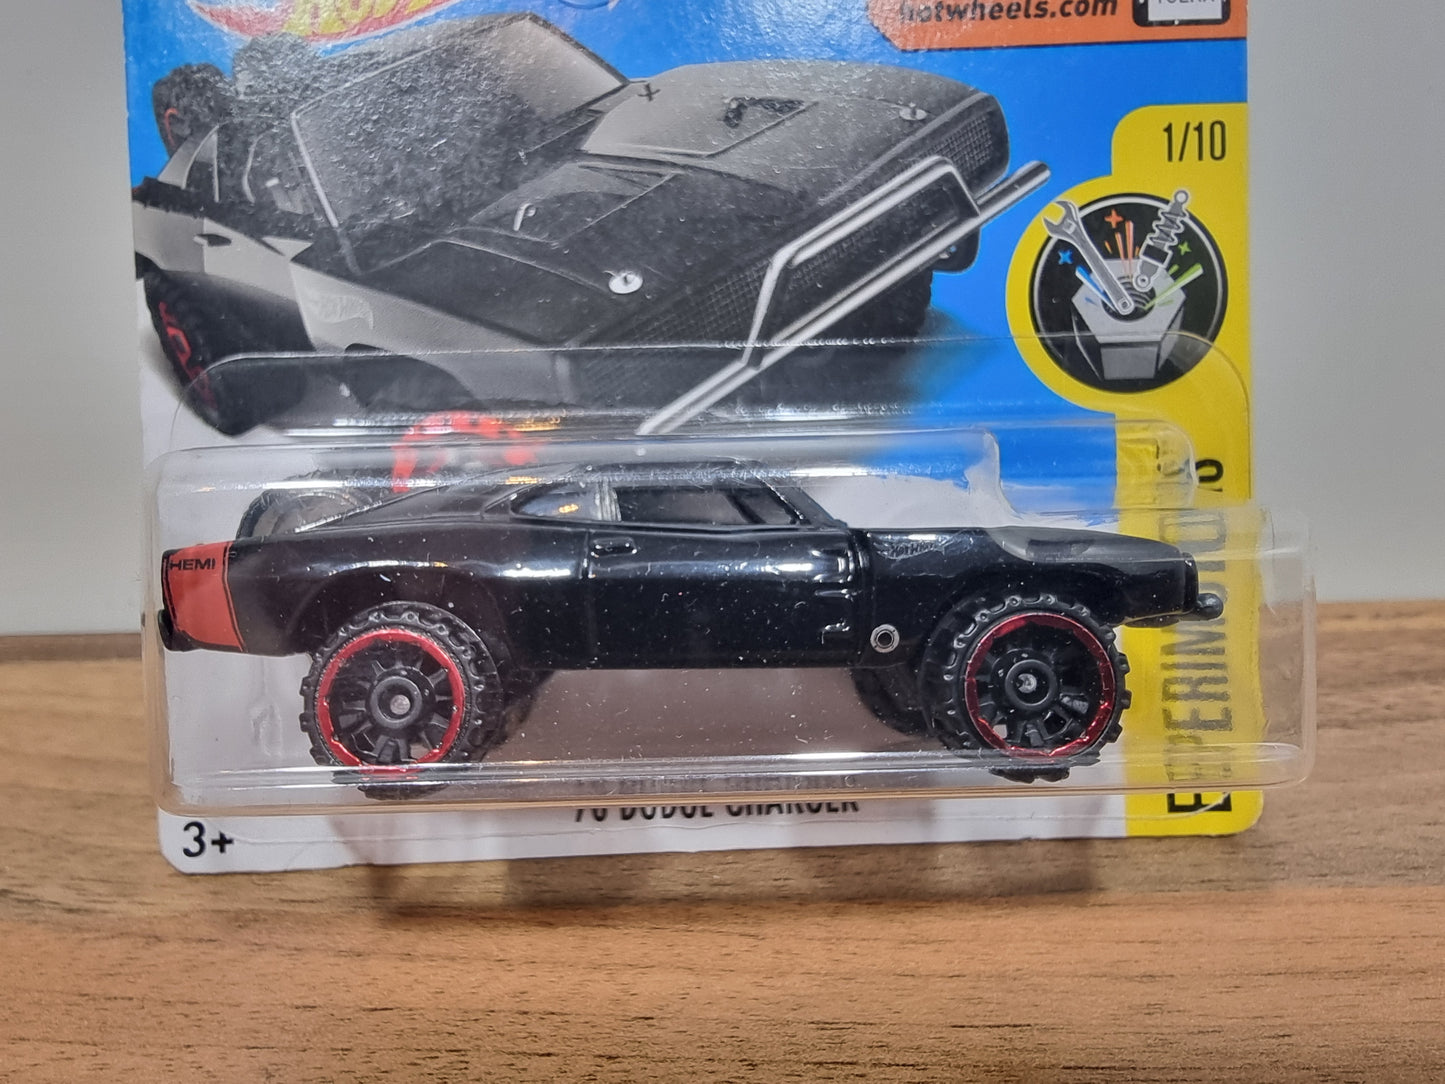 Hot wheels '70 Dodge Charger